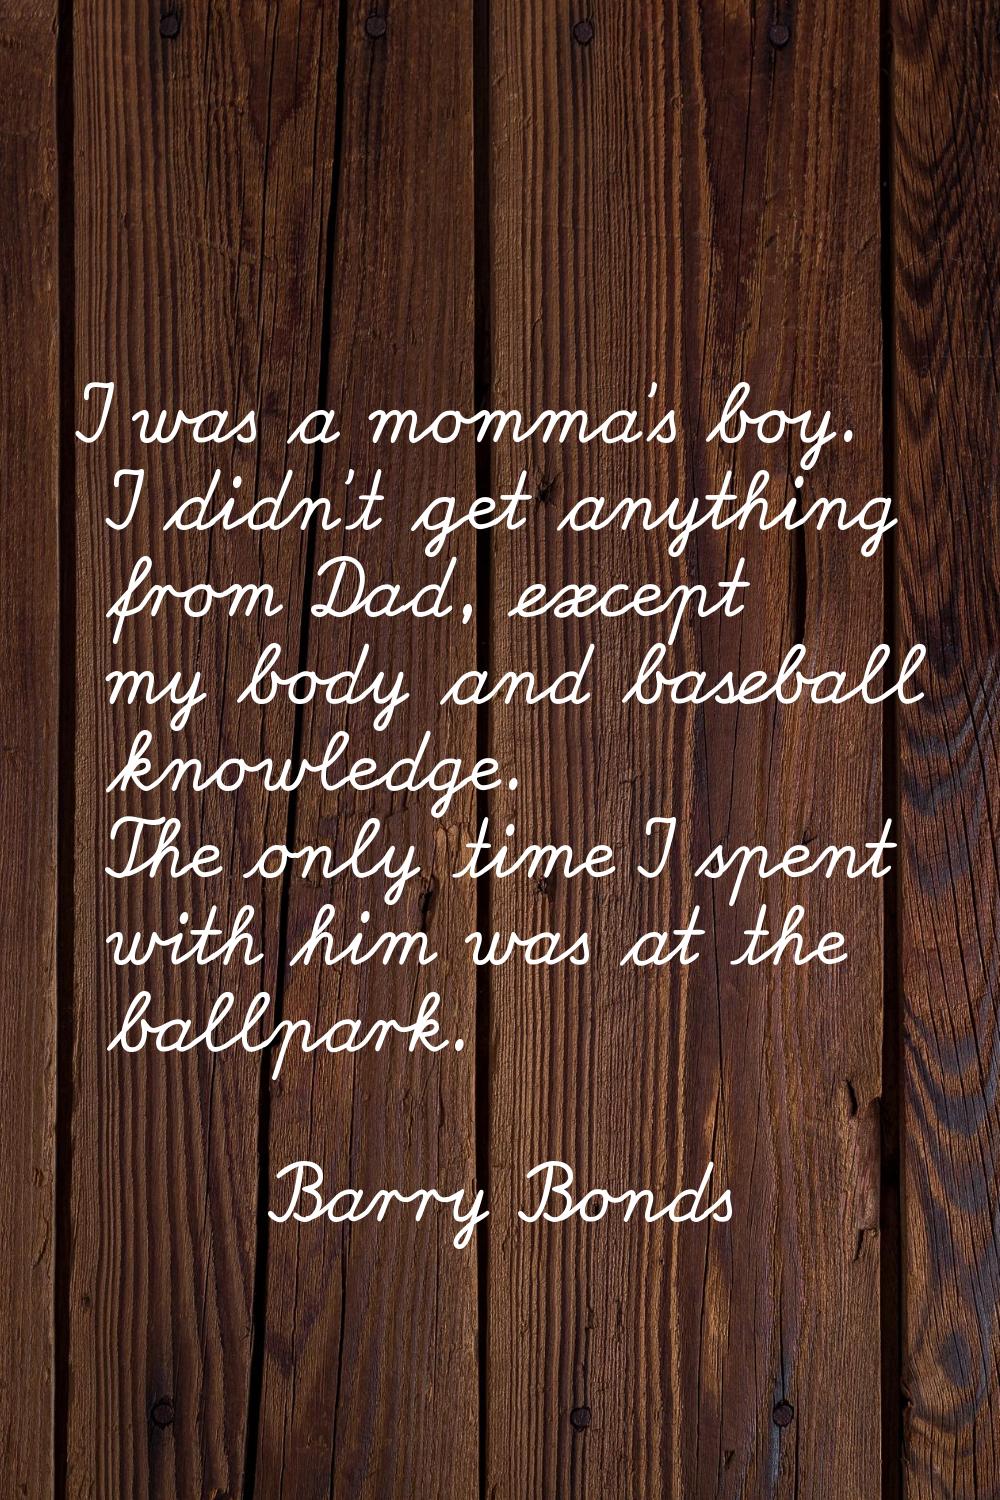 I was a momma's boy. I didn't get anything from Dad, except my body and baseball knowledge. The onl